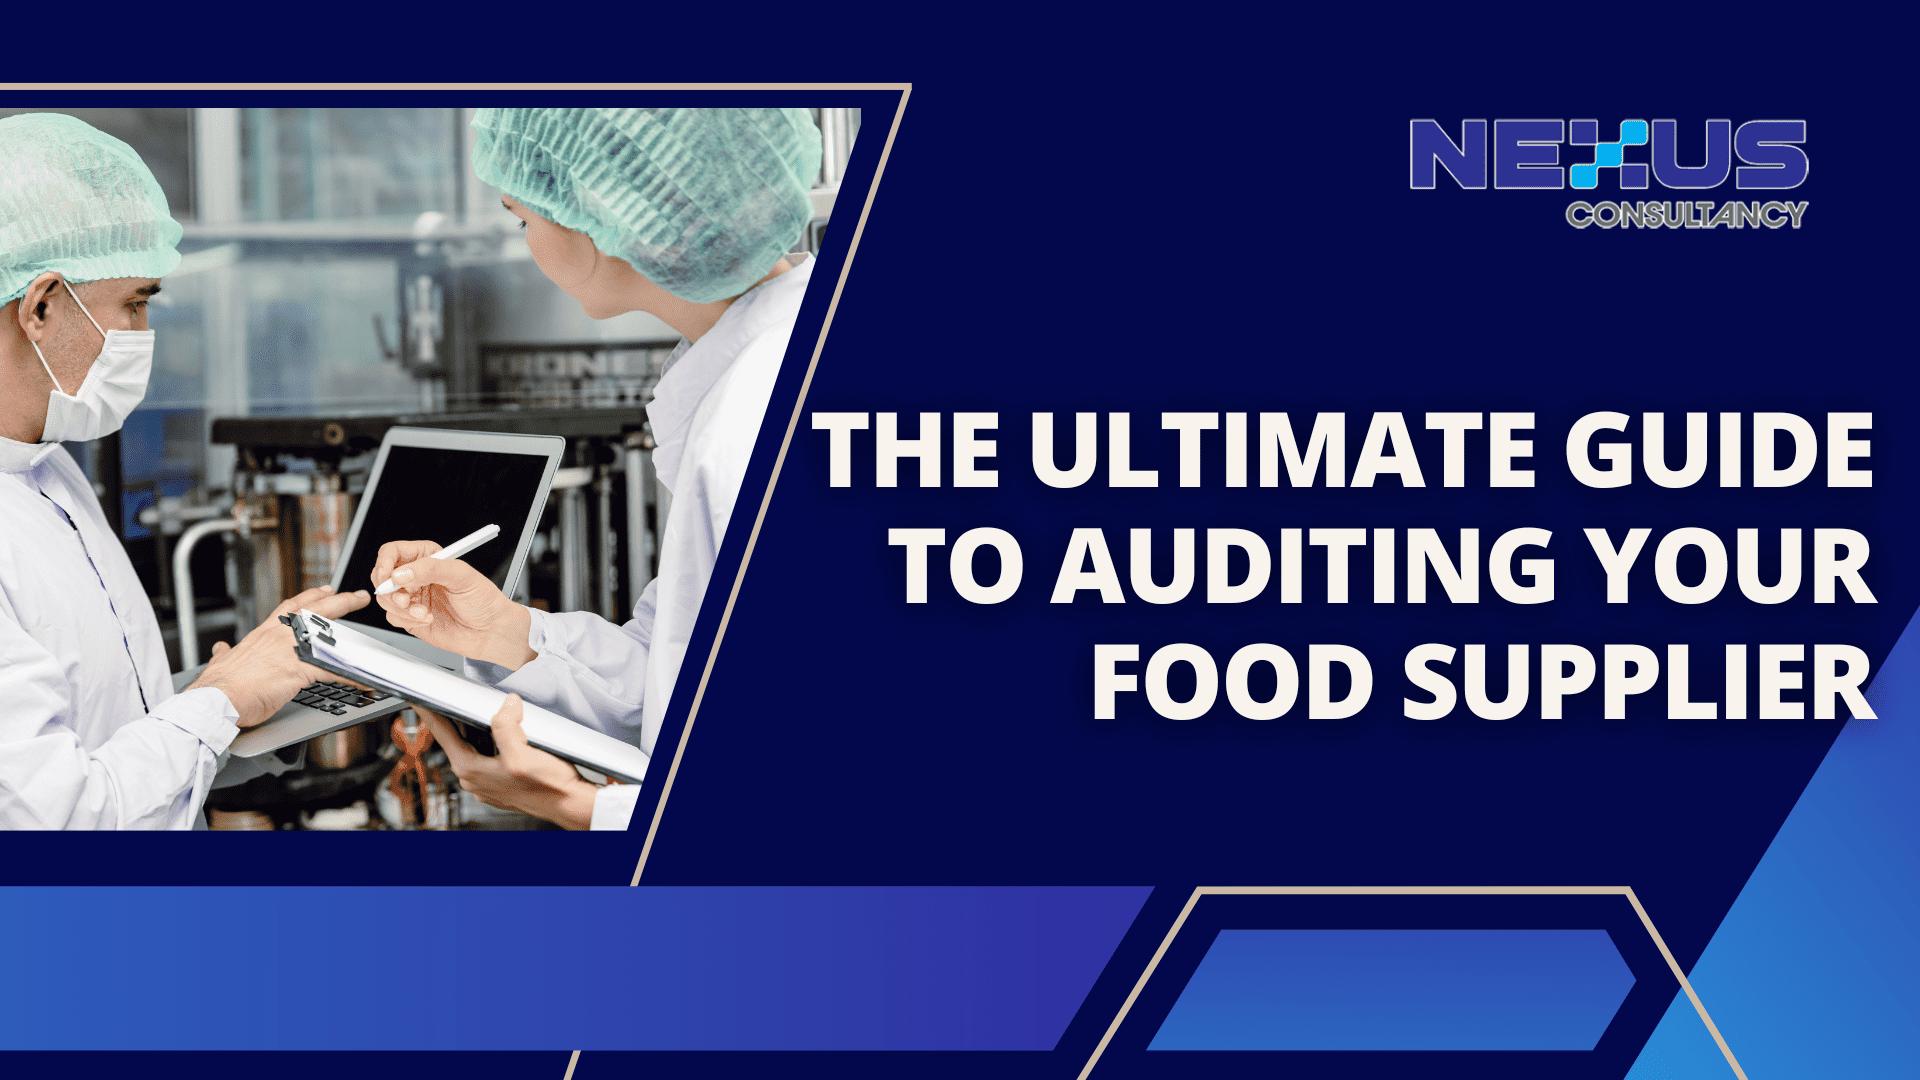 The Ultimate Guide to Auditing Your Food Supplier